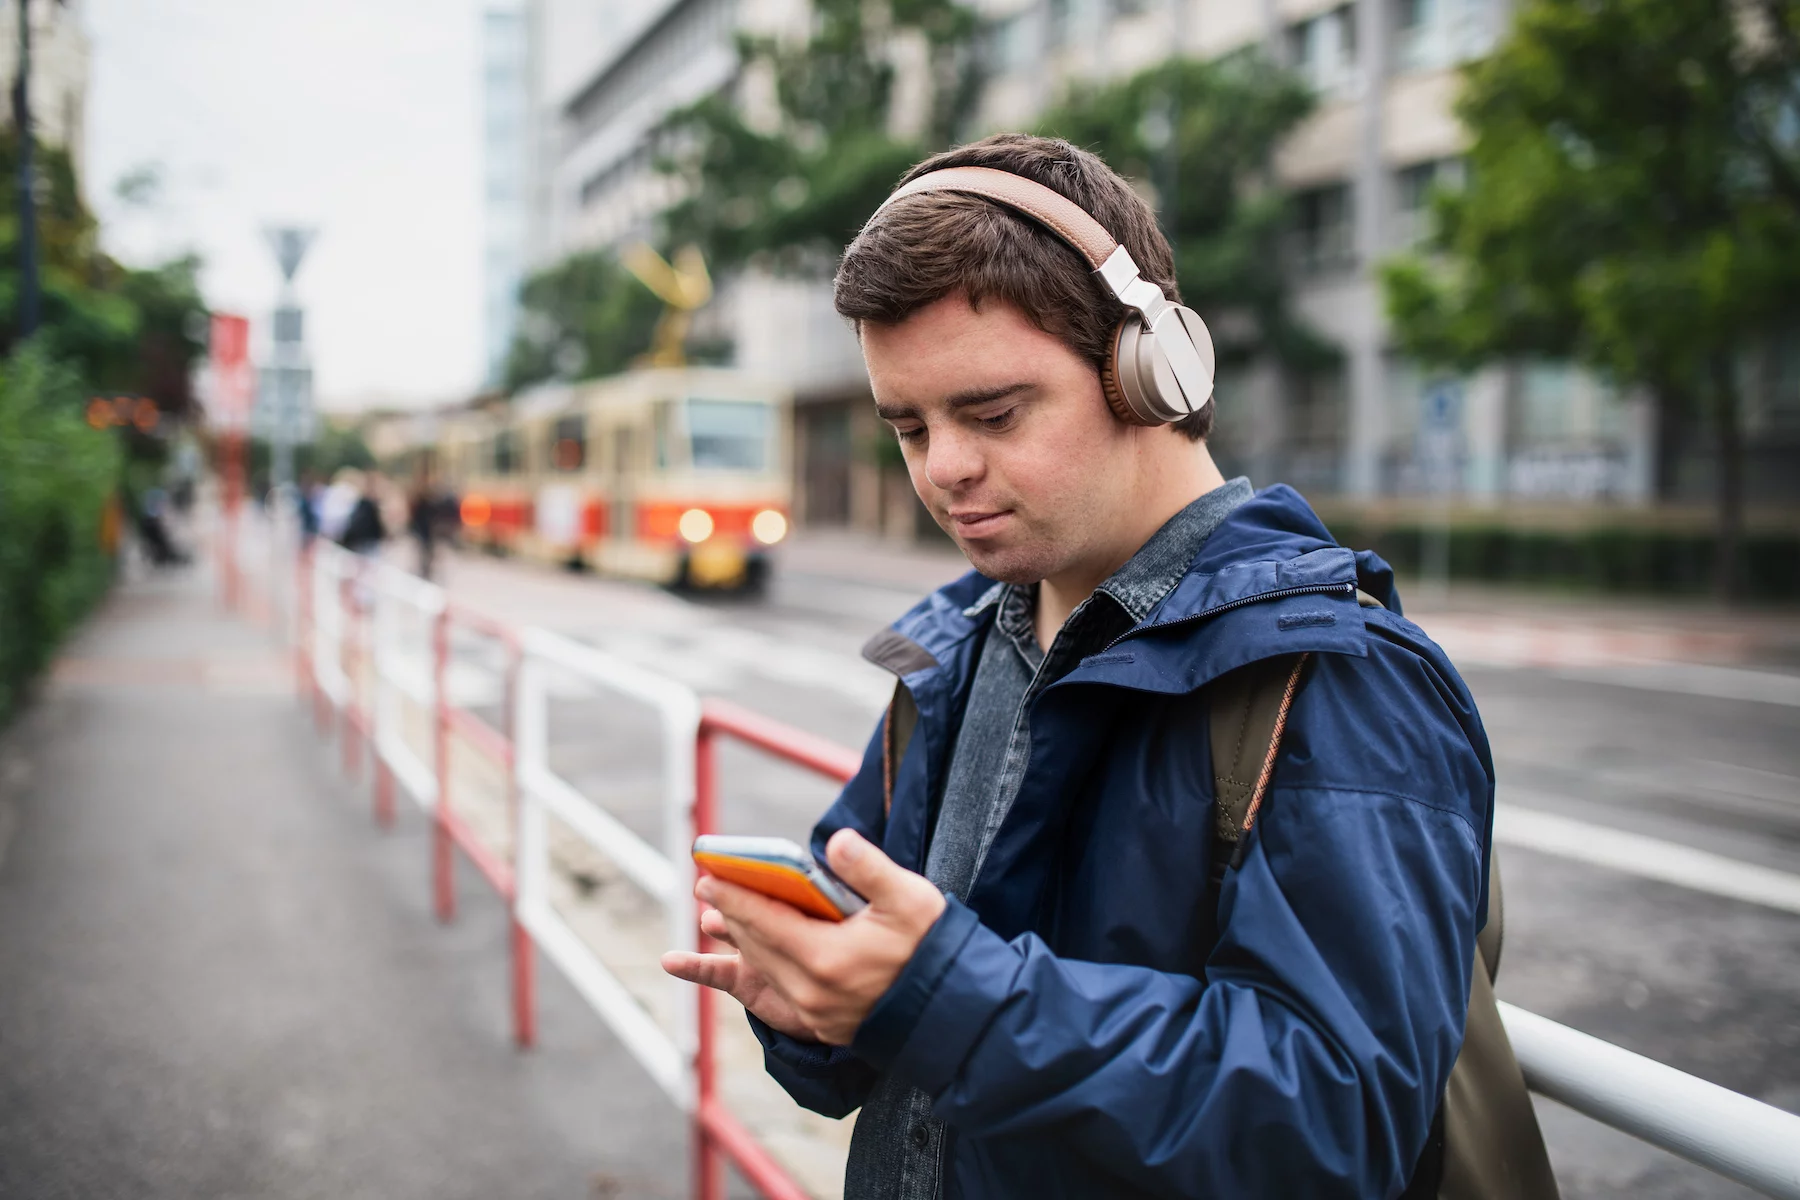 A young man wearing over-ear headphones checks his phone while a tram drives by behind him